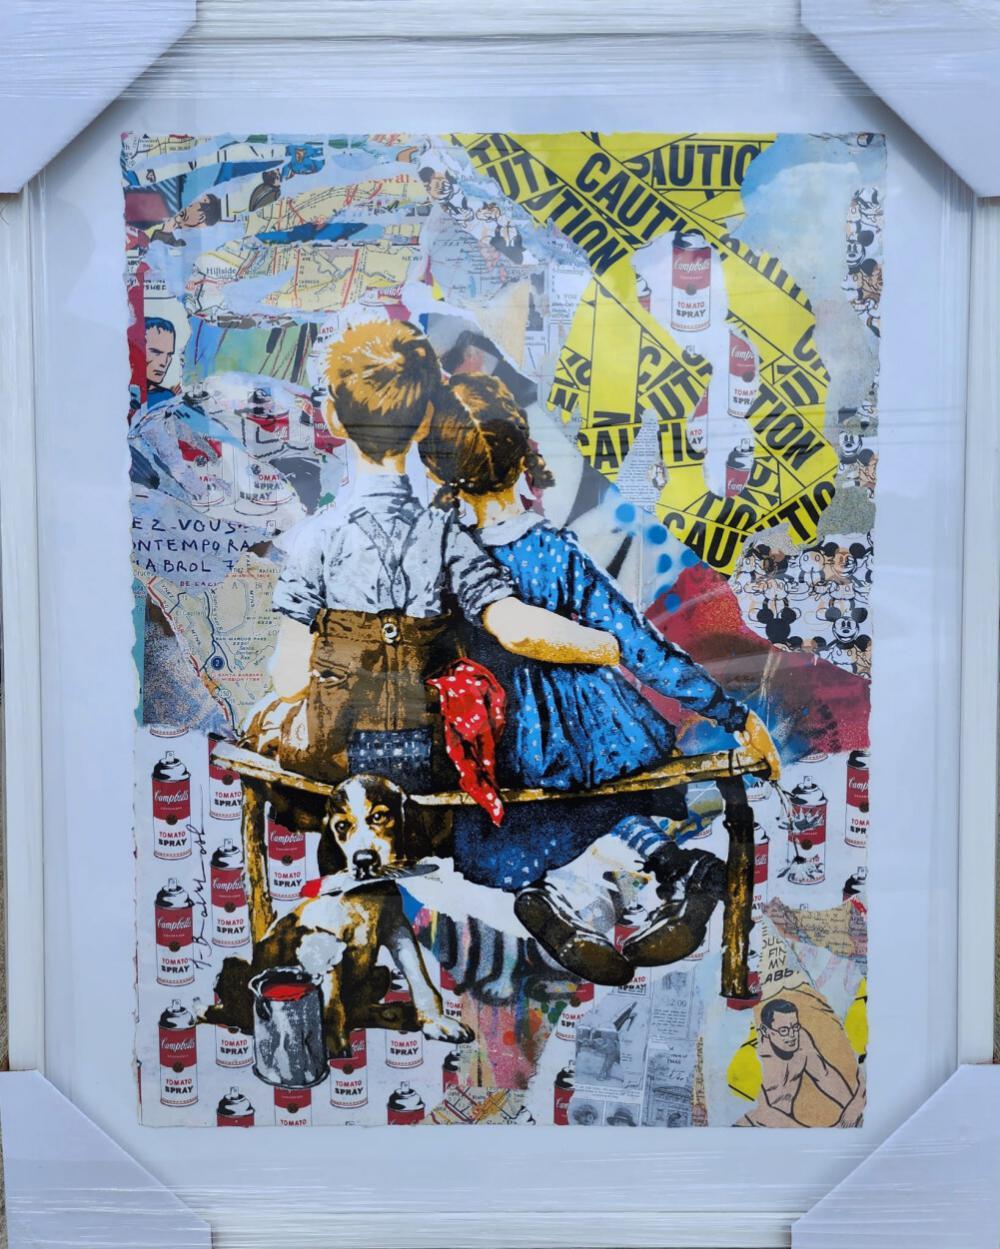 WORK WELL TOGETHER - Mixed Media Art by Mr. Brainwash